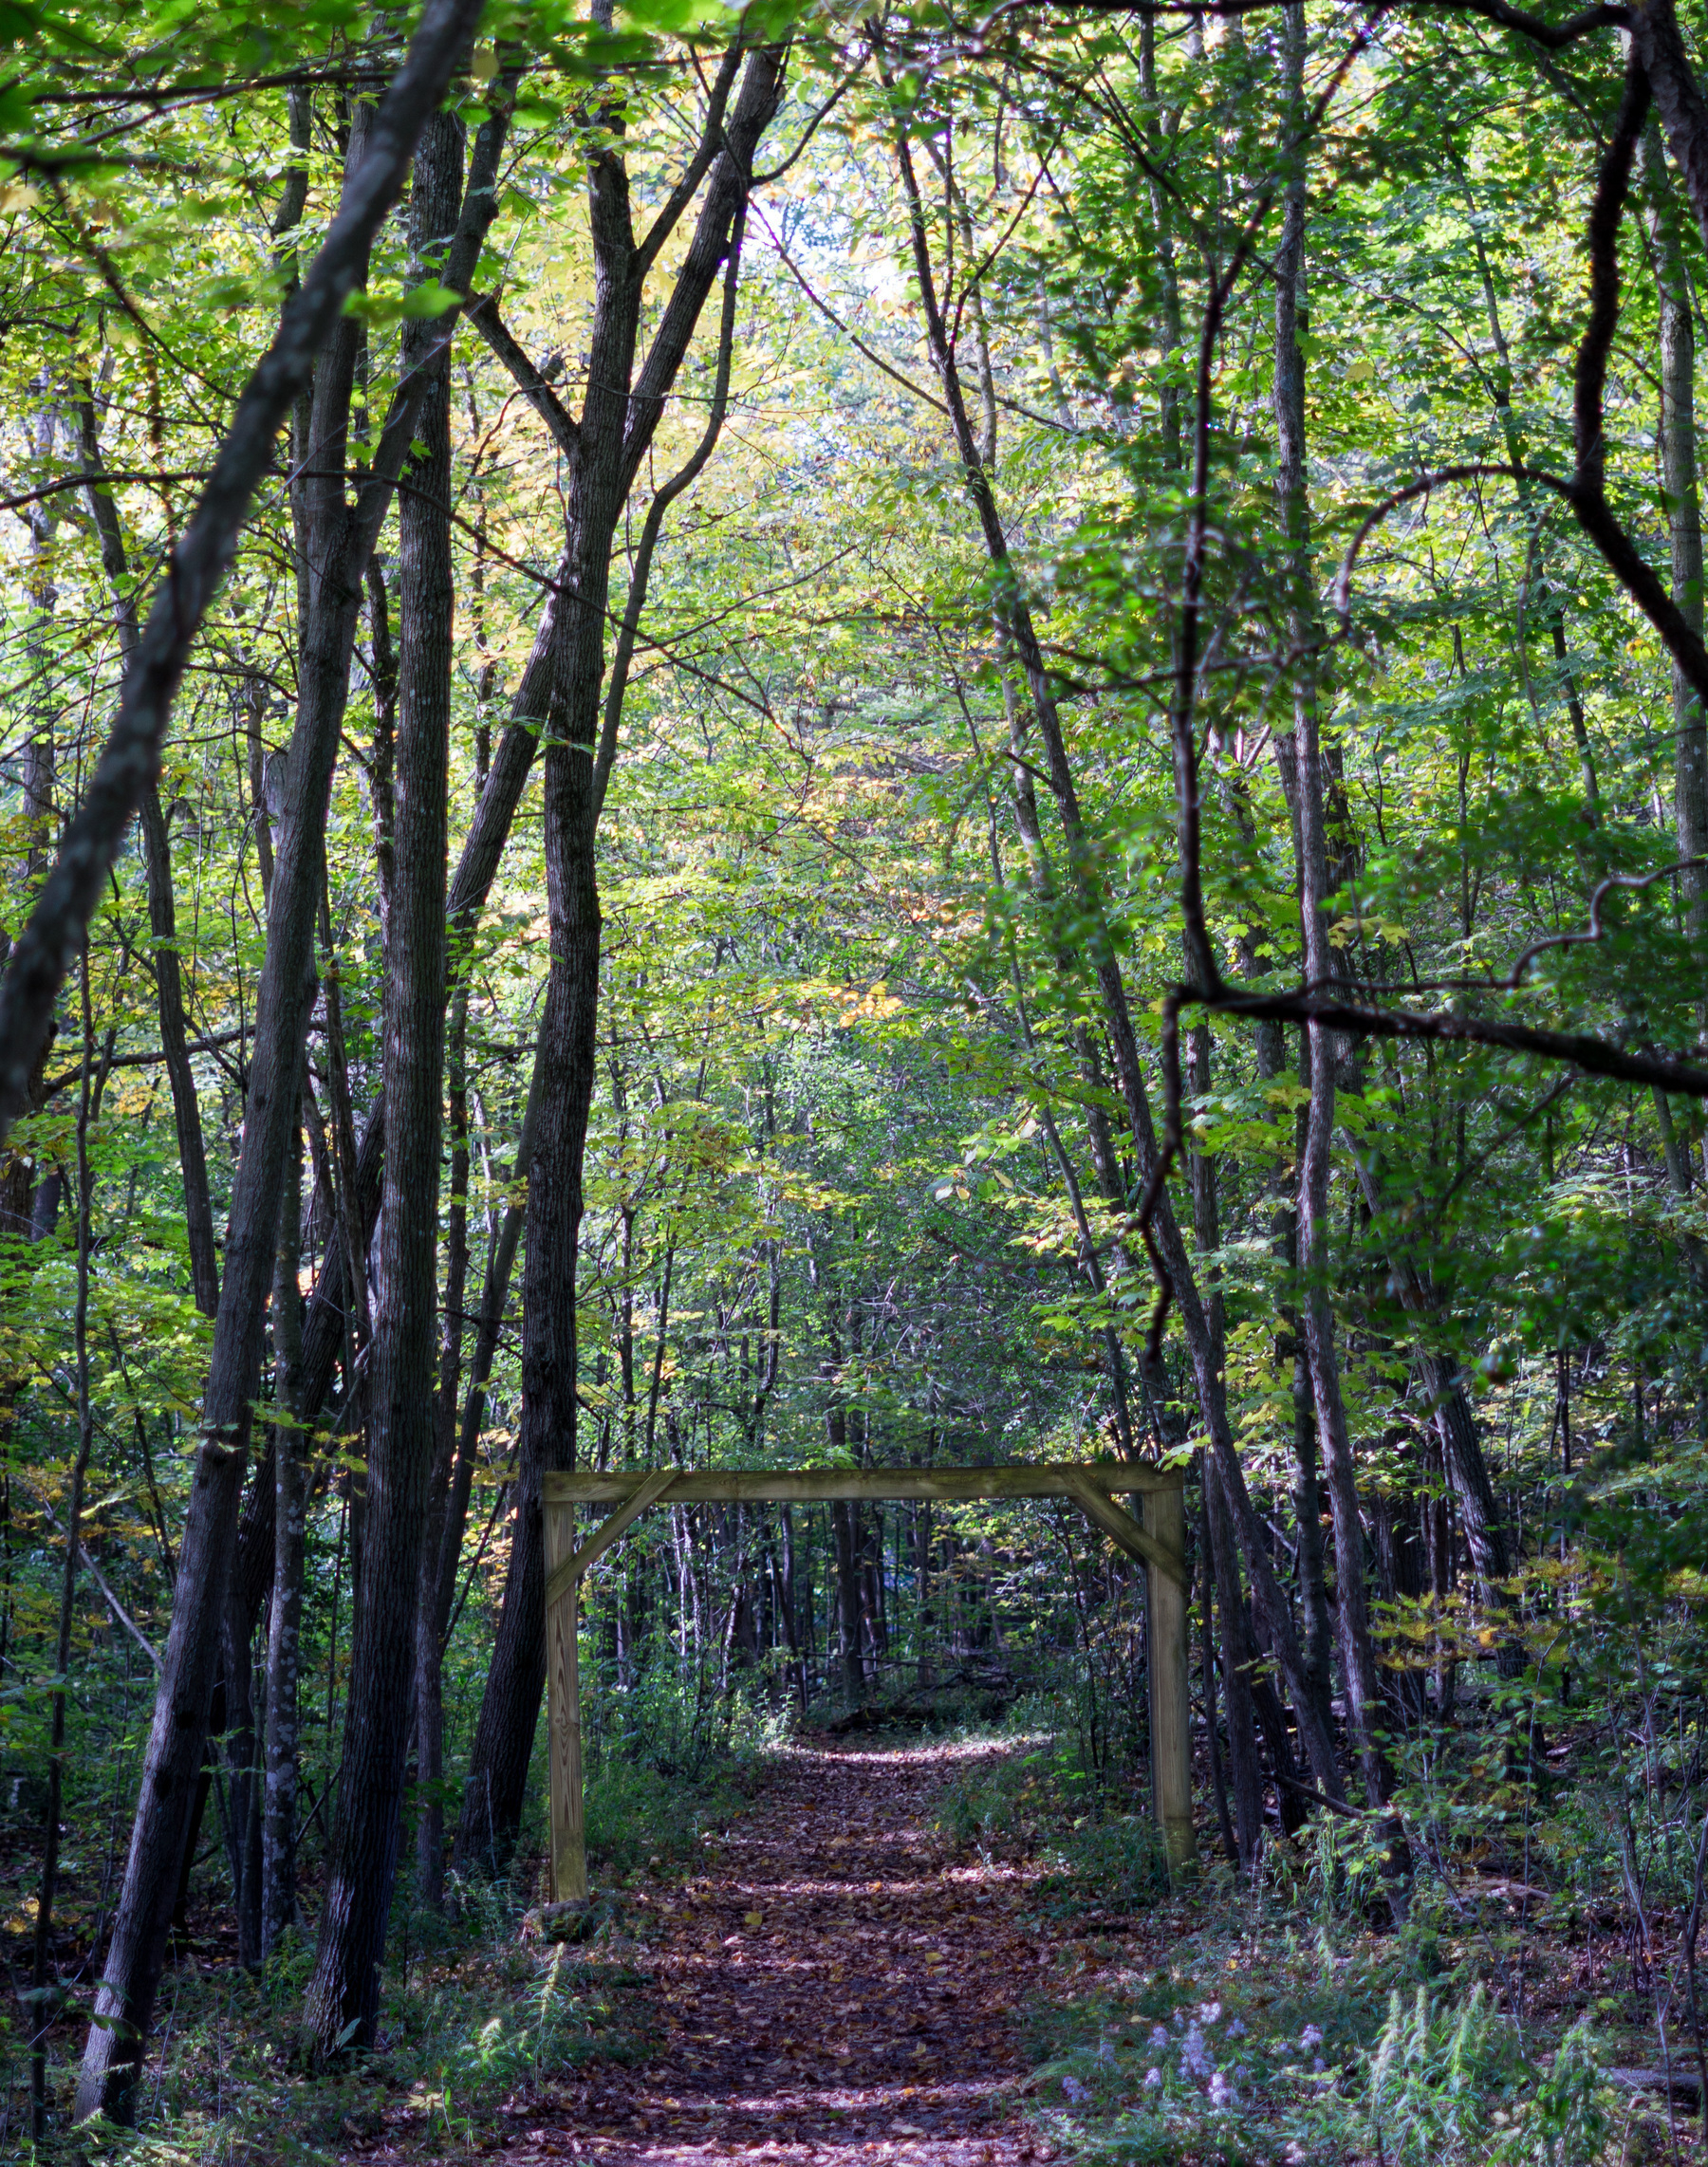 A path in the woods paved with brown leaves. There's a wooden frame standing ahead like a gate, which blends well with the forest in the background.